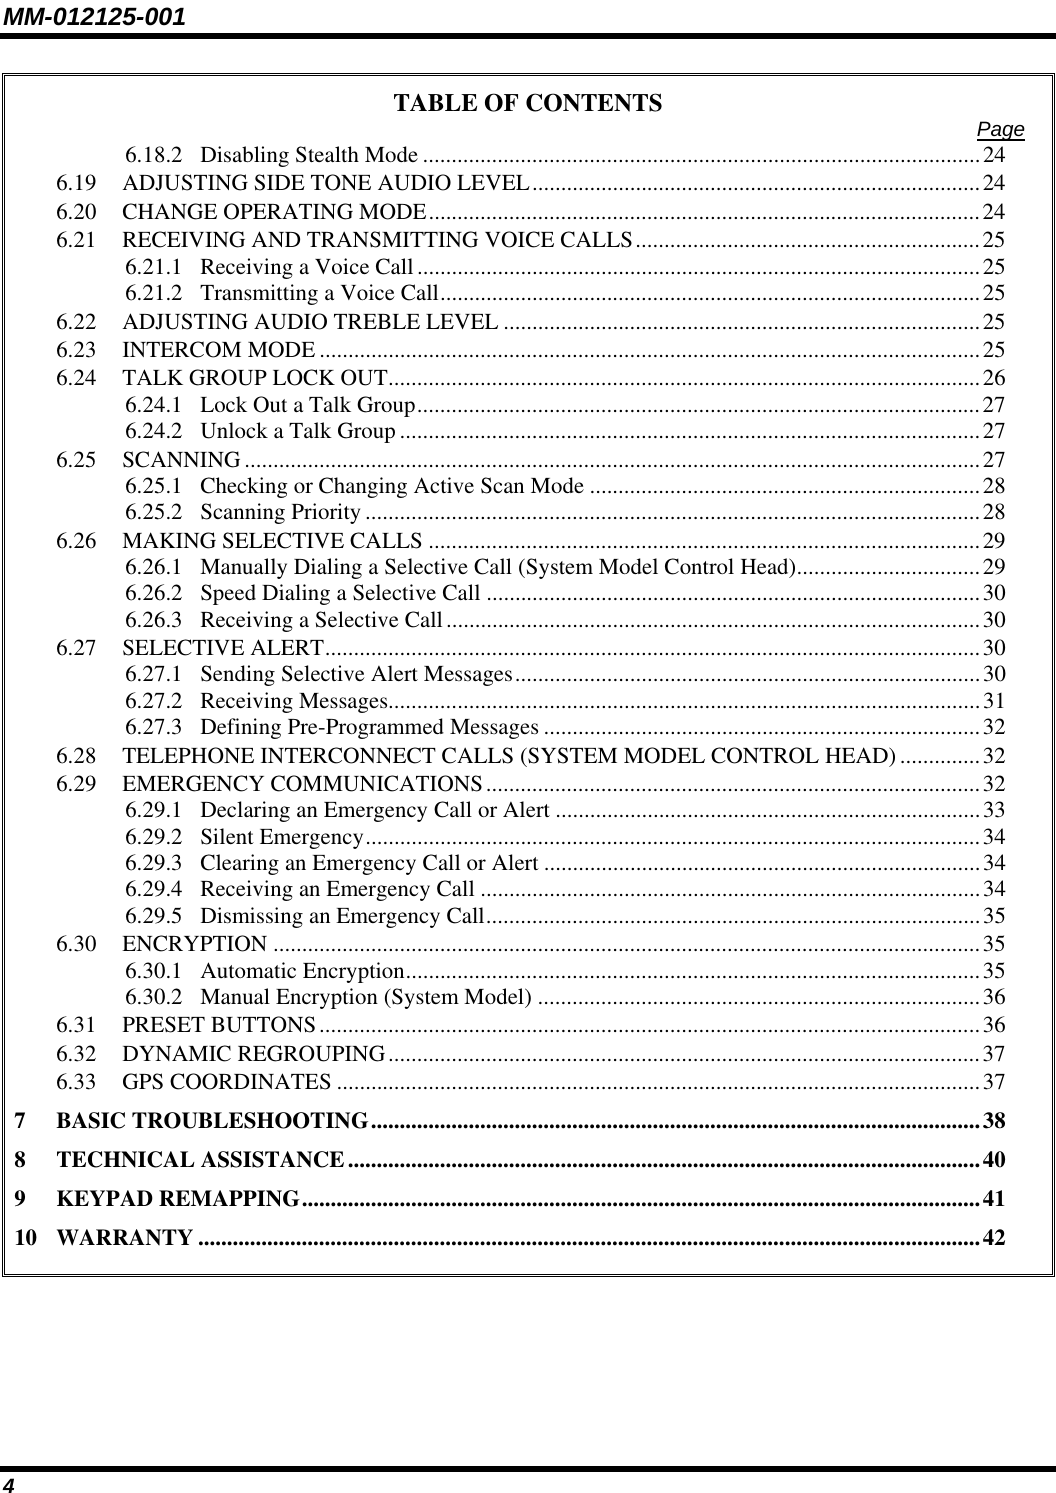 MM-012125-001 TABLE OF CONTENTS  Page 6.18.2 Disabling Stealth Mode .................................................................................................24 6.19 ADJUSTING SIDE TONE AUDIO LEVEL..............................................................................24 6.20 CHANGE OPERATING MODE................................................................................................24 6.21 RECEIVING AND TRANSMITTING VOICE CALLS............................................................25 6.21.1 Receiving a Voice Call..................................................................................................25 6.21.2 Transmitting a Voice Call..............................................................................................25 6.22 ADJUSTING AUDIO TREBLE LEVEL ...................................................................................25 6.23 INTERCOM MODE ...................................................................................................................25 6.24 TALK GROUP LOCK OUT.......................................................................................................26 6.24.1 Lock Out a Talk Group..................................................................................................27 6.24.2 Unlock a Talk Group .....................................................................................................27 6.25 SCANNING ................................................................................................................................27 6.25.1 Checking or Changing Active Scan Mode ....................................................................28 6.25.2 Scanning Priority...........................................................................................................28 6.26 MAKING SELECTIVE CALLS ................................................................................................29 6.26.1 Manually Dialing a Selective Call (System Model Control Head)................................29 6.26.2 Speed Dialing a Selective Call ......................................................................................30 6.26.3 Receiving a Selective Call.............................................................................................30 6.27 SELECTIVE ALERT..................................................................................................................30 6.27.1 Sending Selective Alert Messages.................................................................................30 6.27.2 Receiving Messages.......................................................................................................31 6.27.3 Defining Pre-Programmed Messages ............................................................................32 6.28 TELEPHONE INTERCONNECT CALLS (SYSTEM MODEL CONTROL HEAD) ..............32 6.29 EMERGENCY COMMUNICATIONS......................................................................................32 6.29.1 Declaring an Emergency Call or Alert ..........................................................................33 6.29.2 Silent Emergency...........................................................................................................34 6.29.3 Clearing an Emergency Call or Alert ............................................................................34 6.29.4 Receiving an Emergency Call .......................................................................................34 6.29.5 Dismissing an Emergency Call......................................................................................35 6.30 ENCRYPTION ...........................................................................................................................35 6.30.1 Automatic Encryption....................................................................................................35 6.30.2 Manual Encryption (System Model) .............................................................................36 6.31 PRESET BUTTONS...................................................................................................................36 6.32 DYNAMIC REGROUPING.......................................................................................................37 6.33 GPS COORDINATES ................................................................................................................37 7 BASIC TROUBLESHOOTING..........................................................................................................38 8 TECHNICAL ASSISTANCE..............................................................................................................40 9 KEYPAD REMAPPING......................................................................................................................41 10 WARRANTY ........................................................................................................................................42  4 